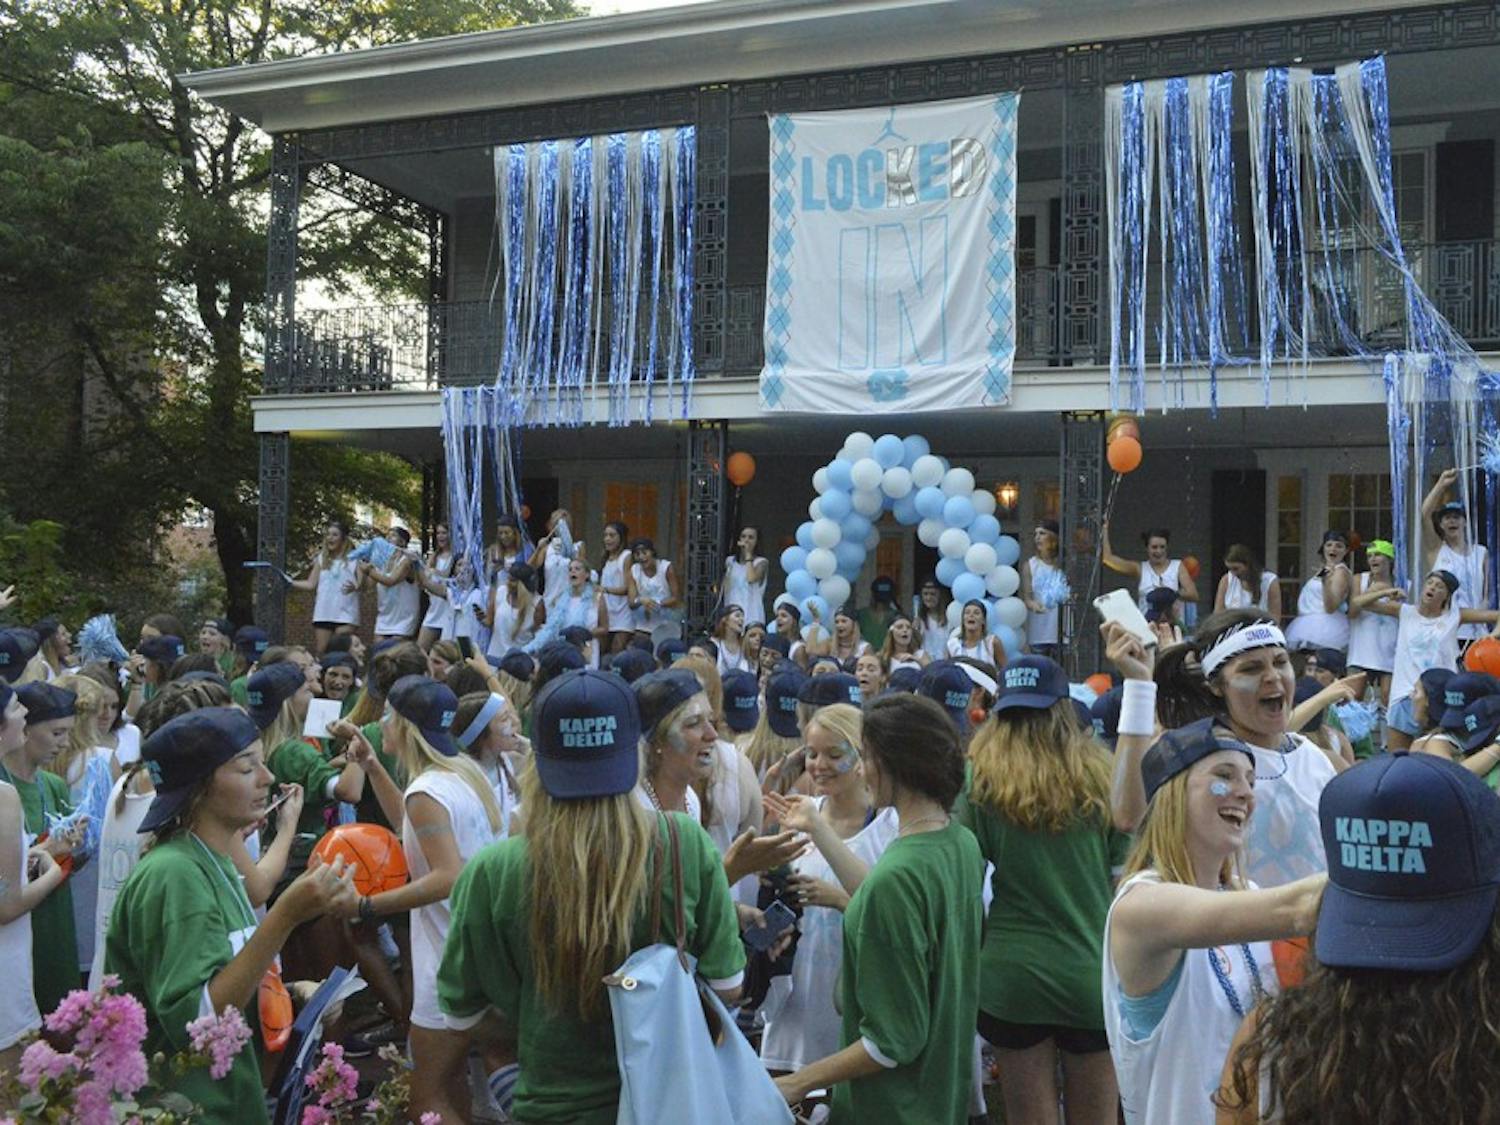 The KD house lights up as new members are welcomed in for the first time.